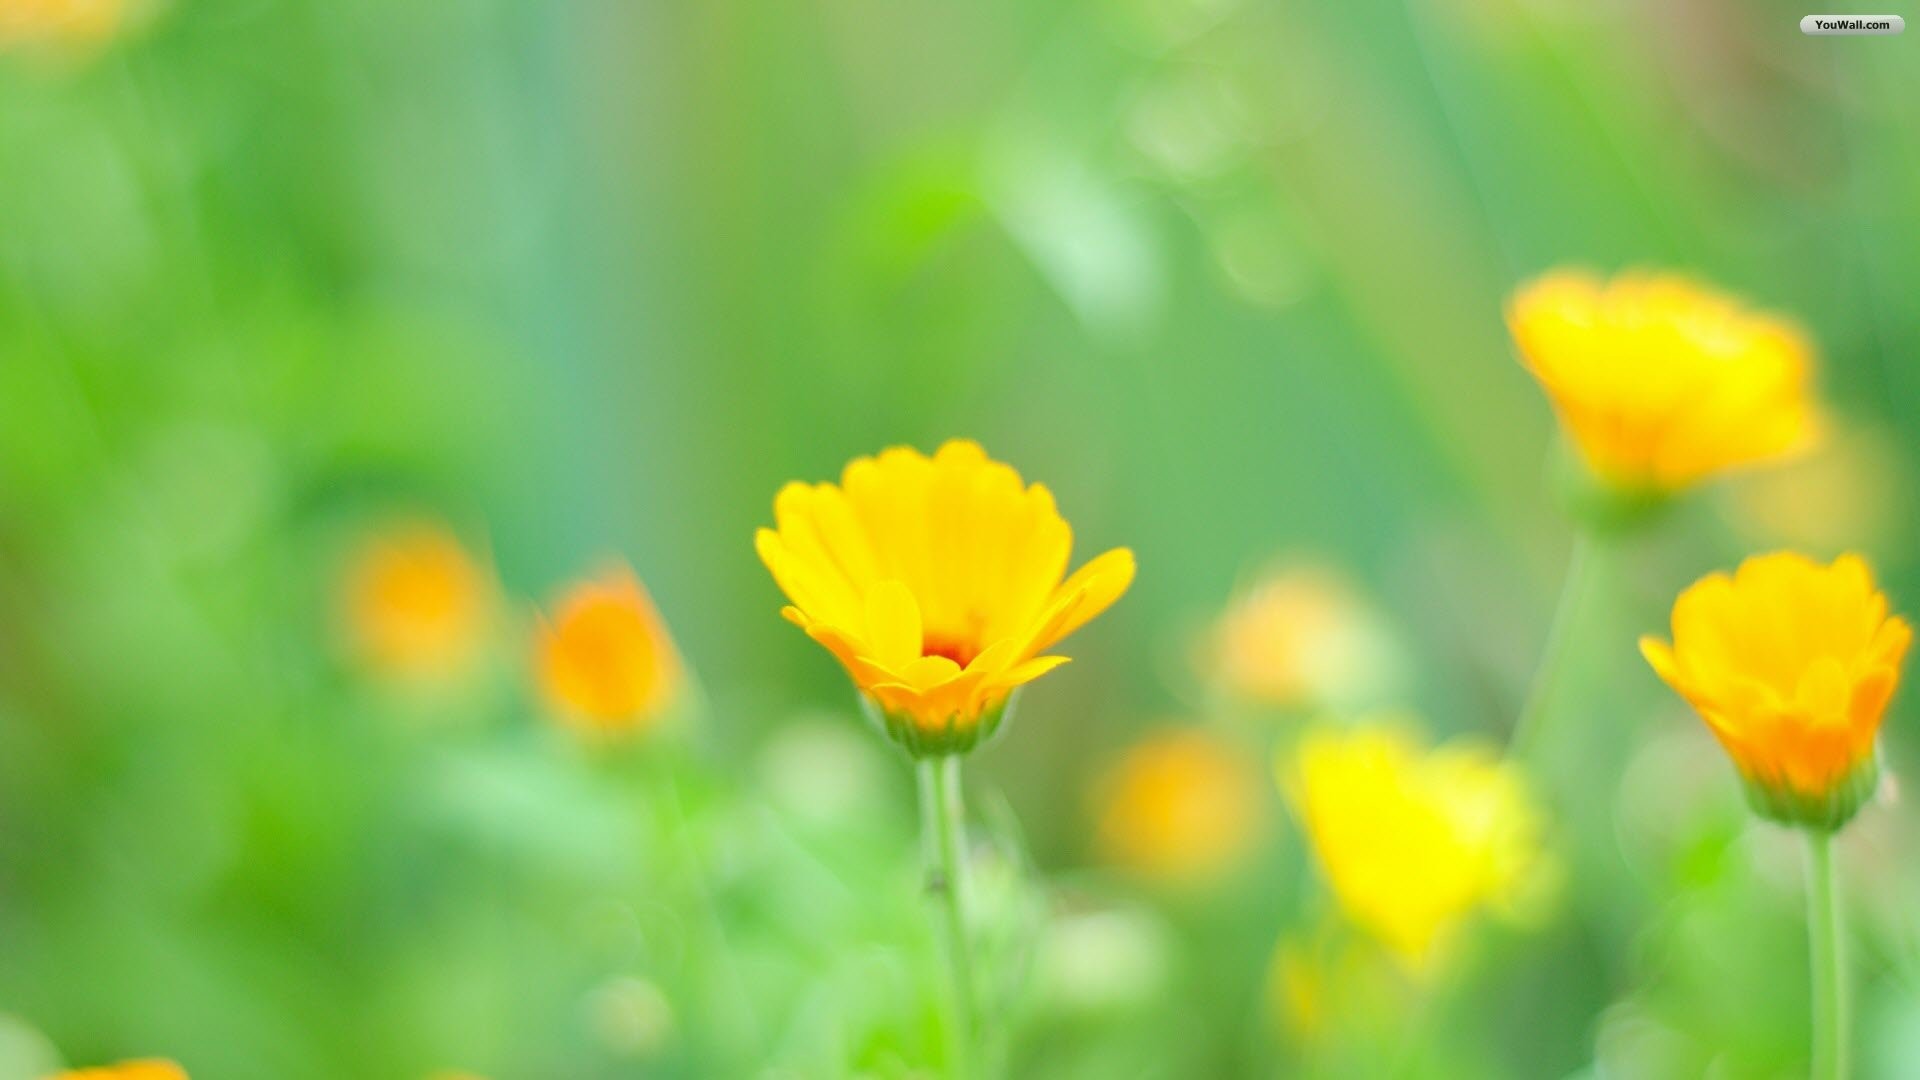 1920x1080 6. yellow-flower-pictures6-600x338